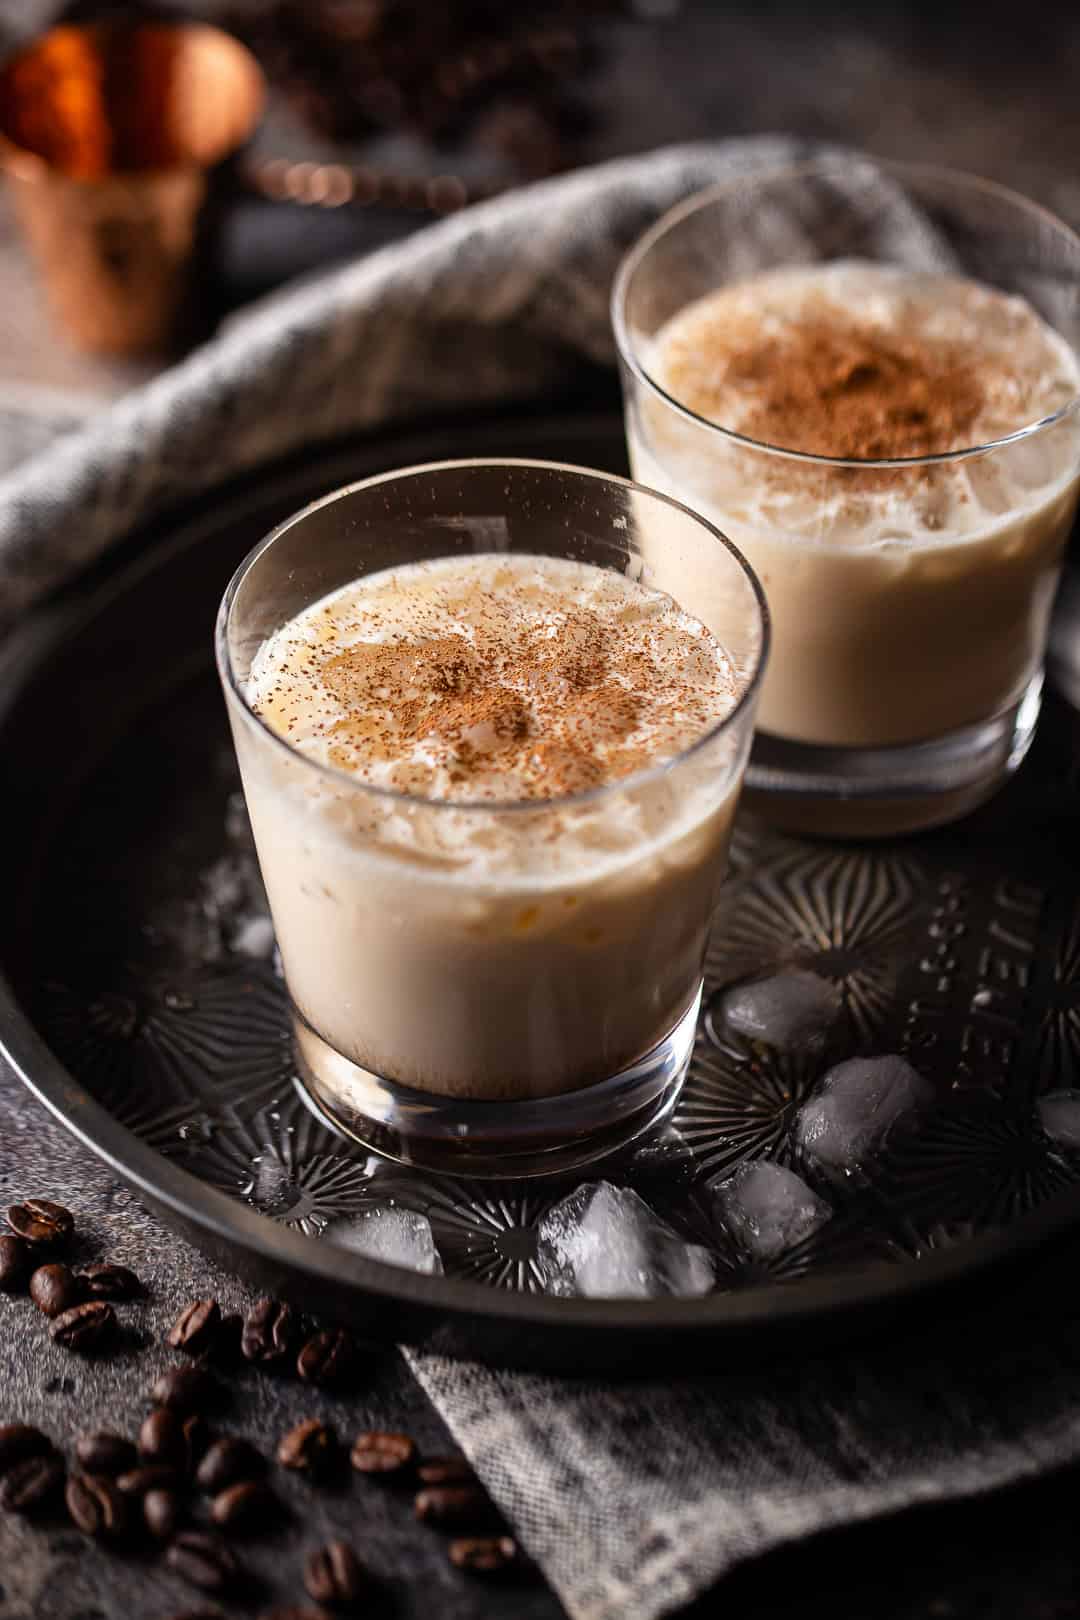 White Russian ingredients stirred together and served over ice.